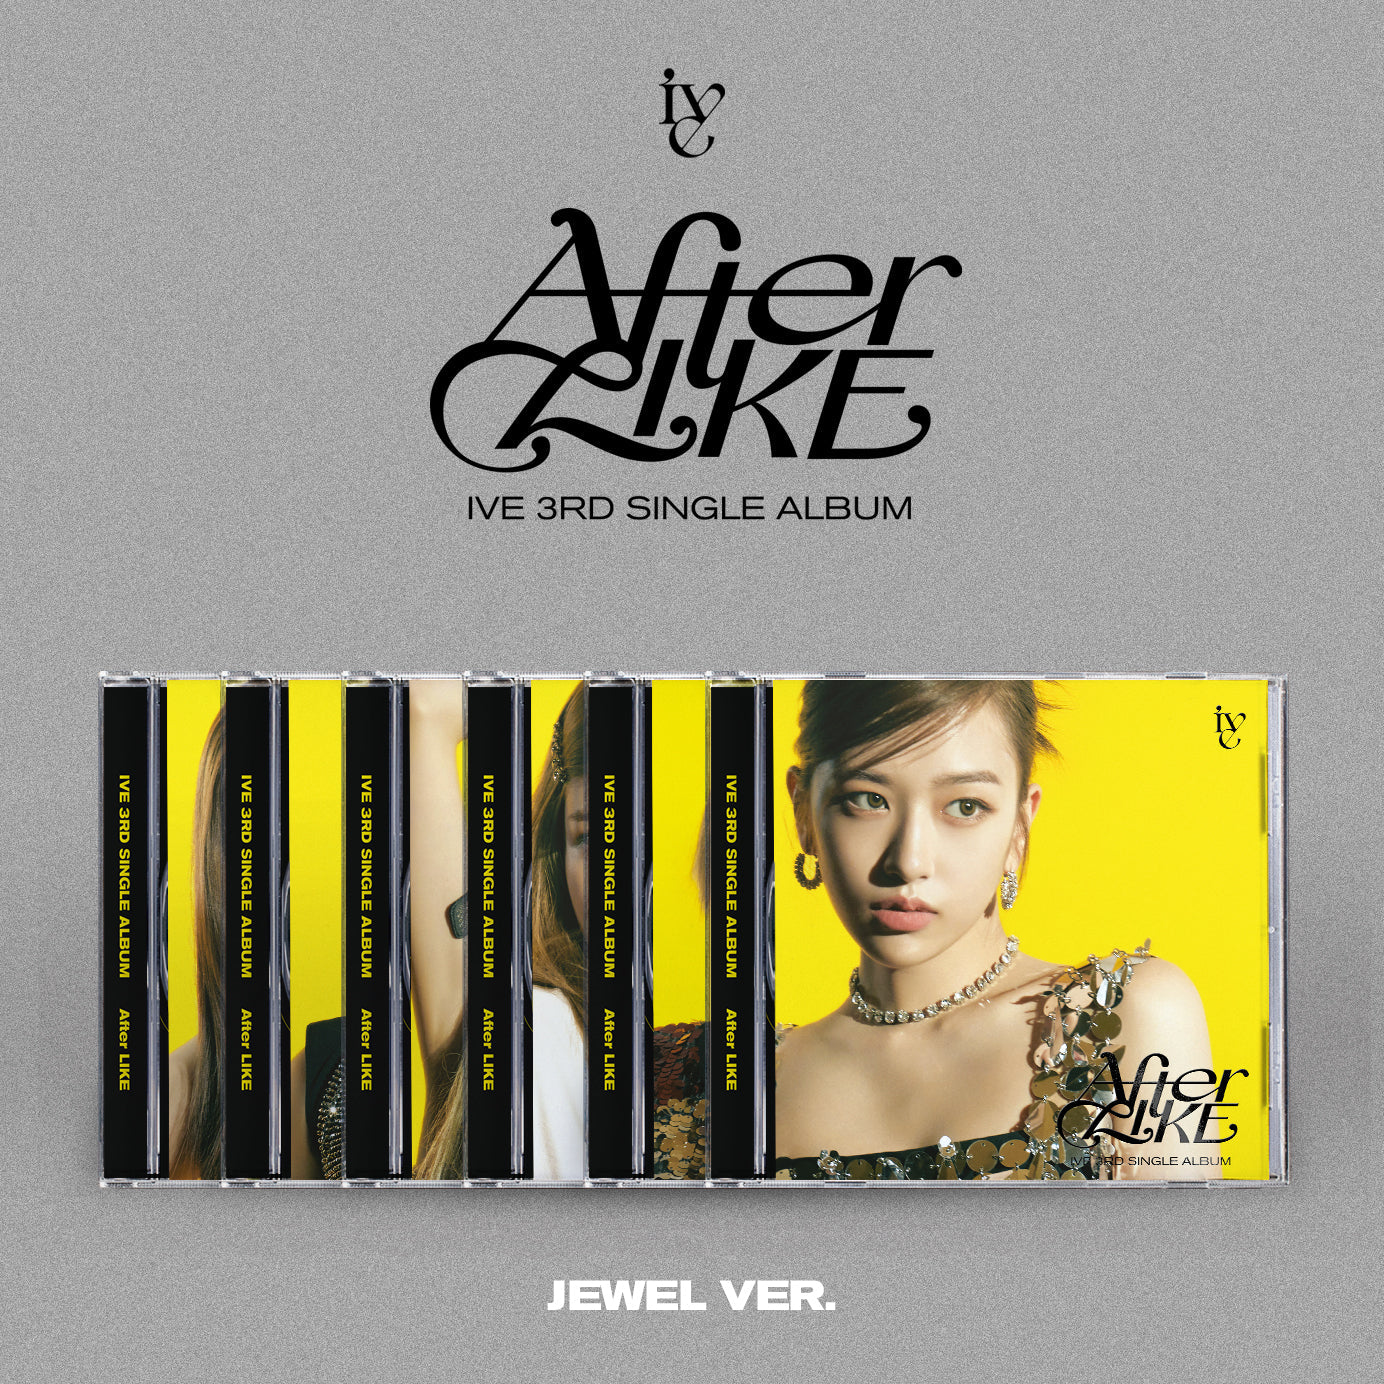 IVE 3RD SINGLE ALBUM 'AFTER LIKE' (JEWEL) COVER